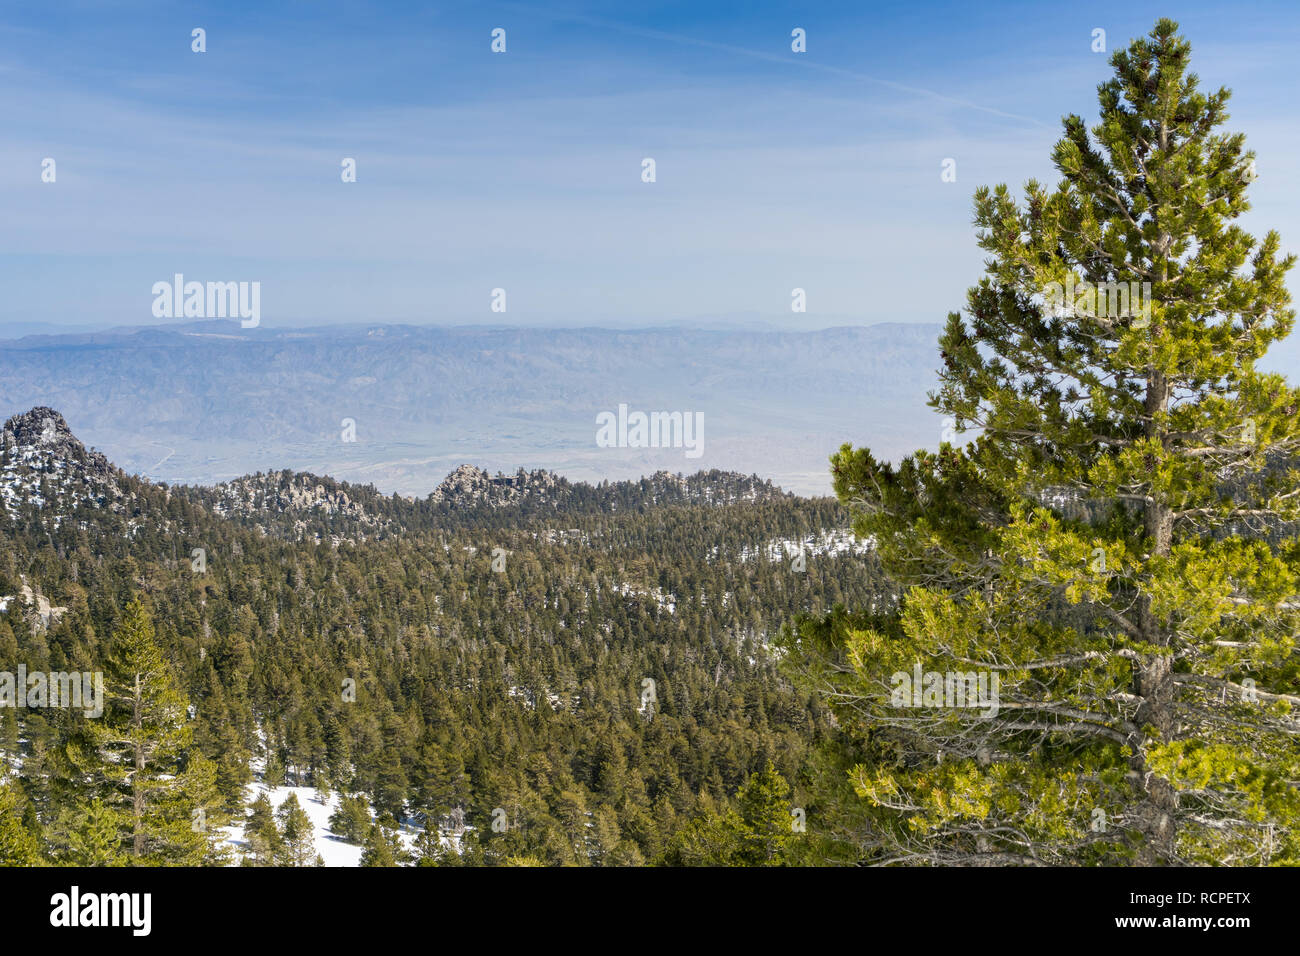 View towards the Palm Springs Aerial Tramway on the ridge from the trail to Mount San Jacinto peak, California Stock Photo